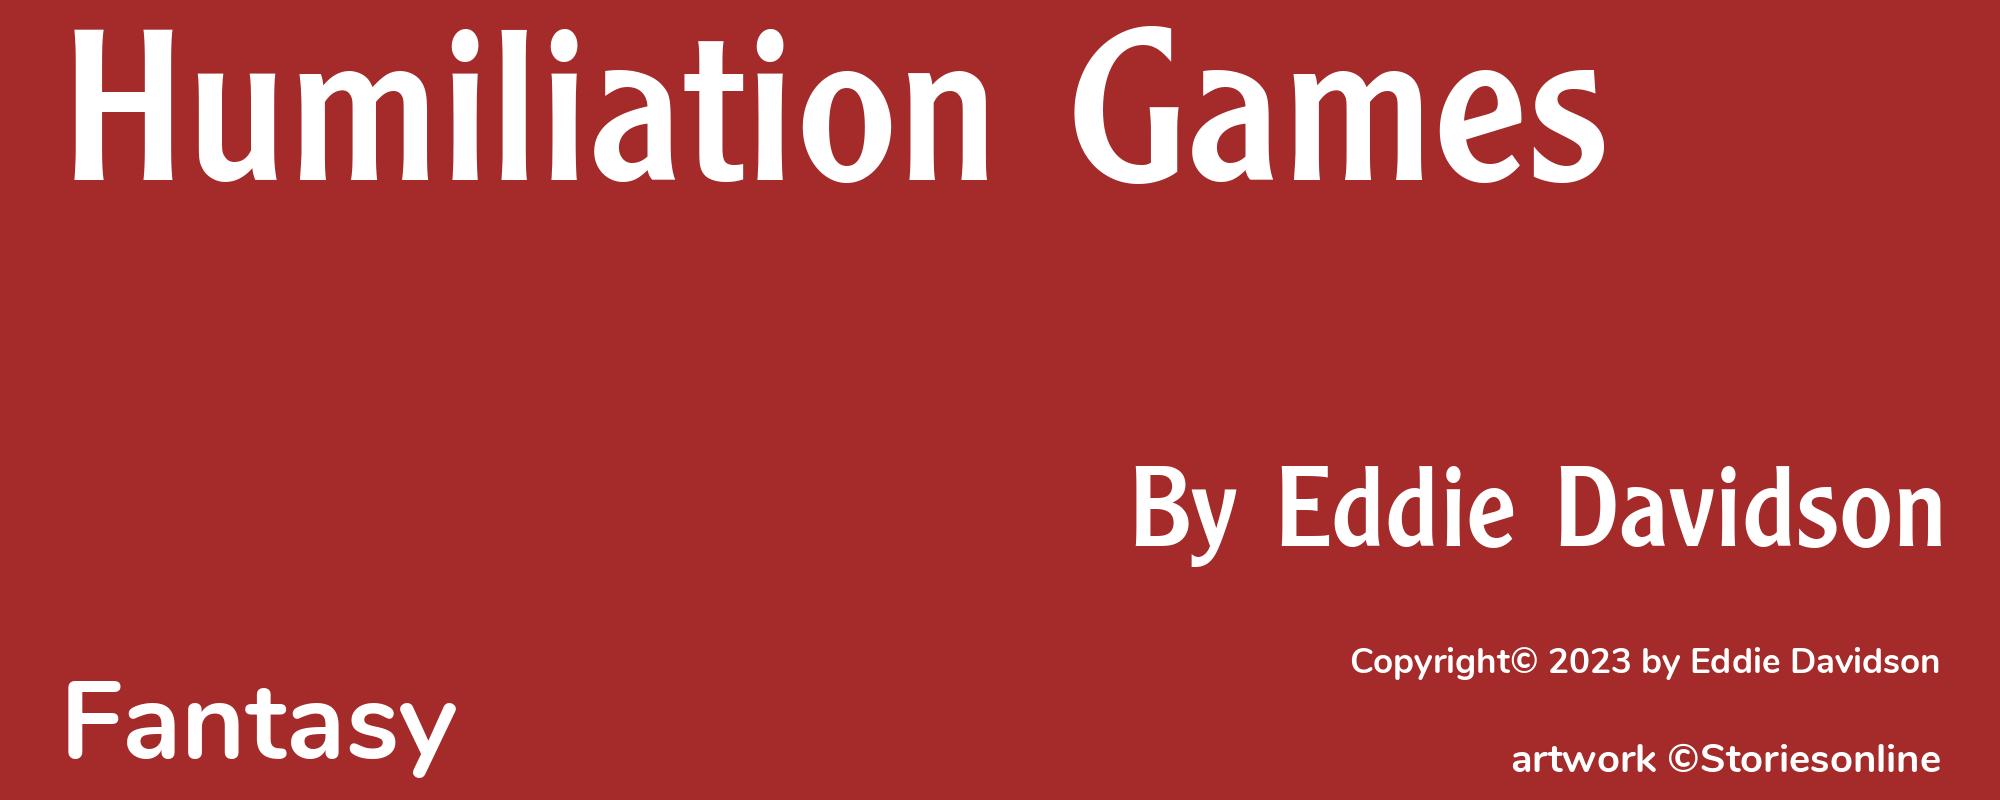 Humiliation Games - Cover